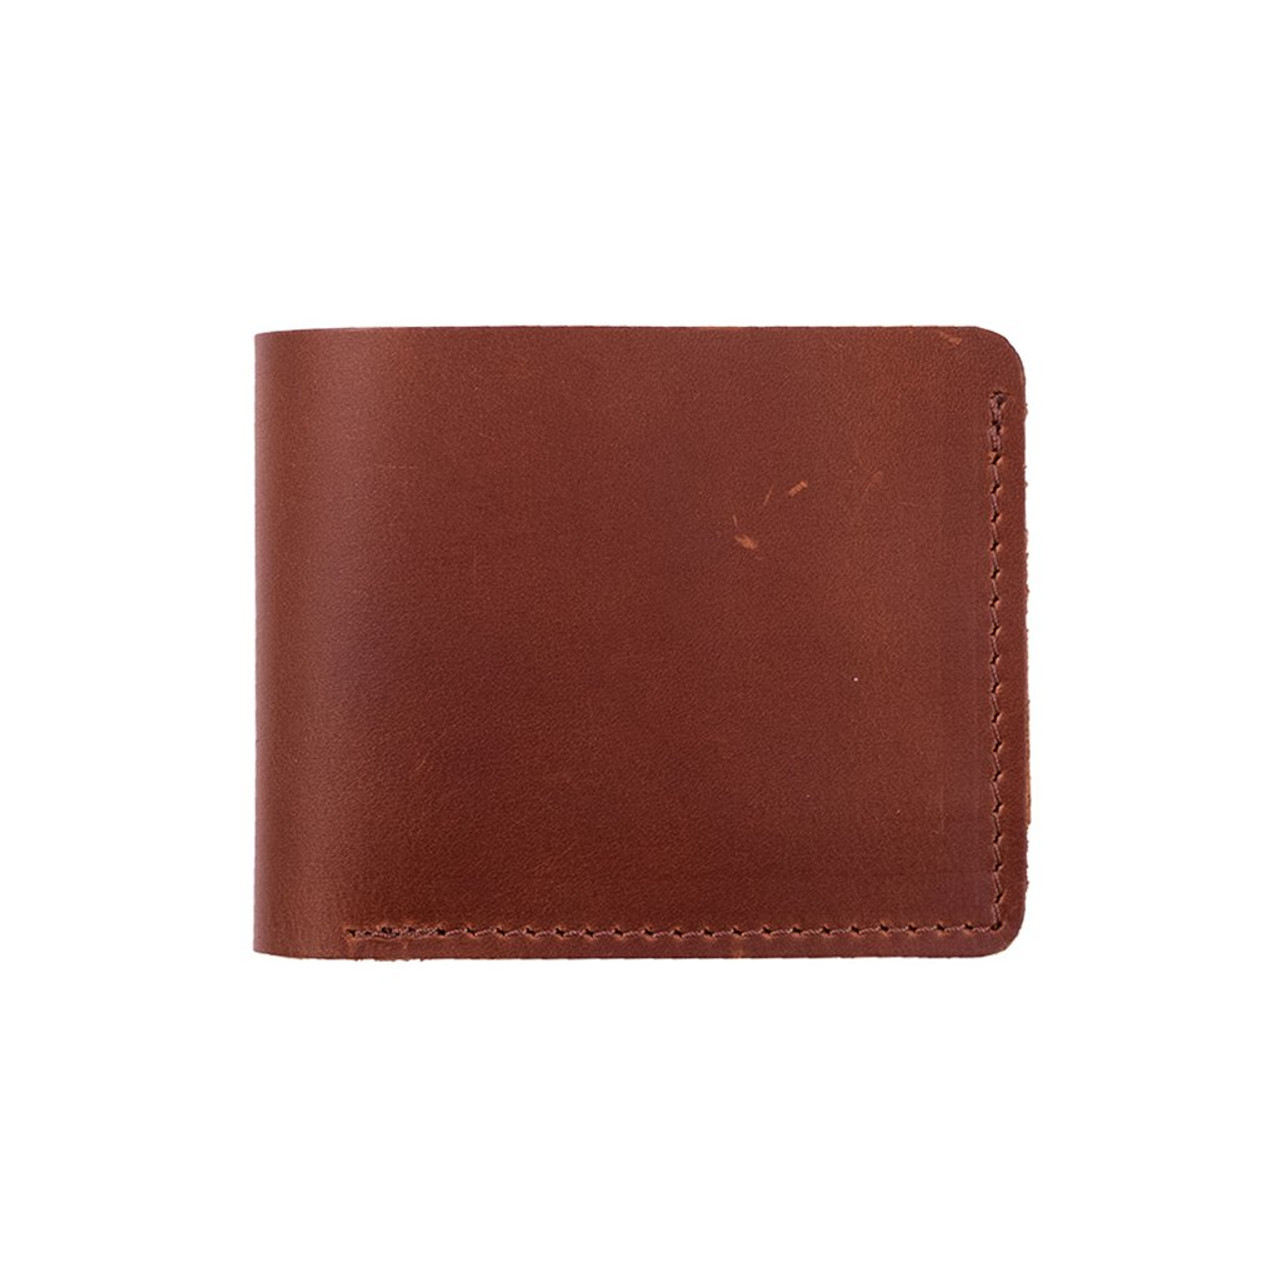 Back of Knox Bifold Leather Wallet - Saddle - by Rustico